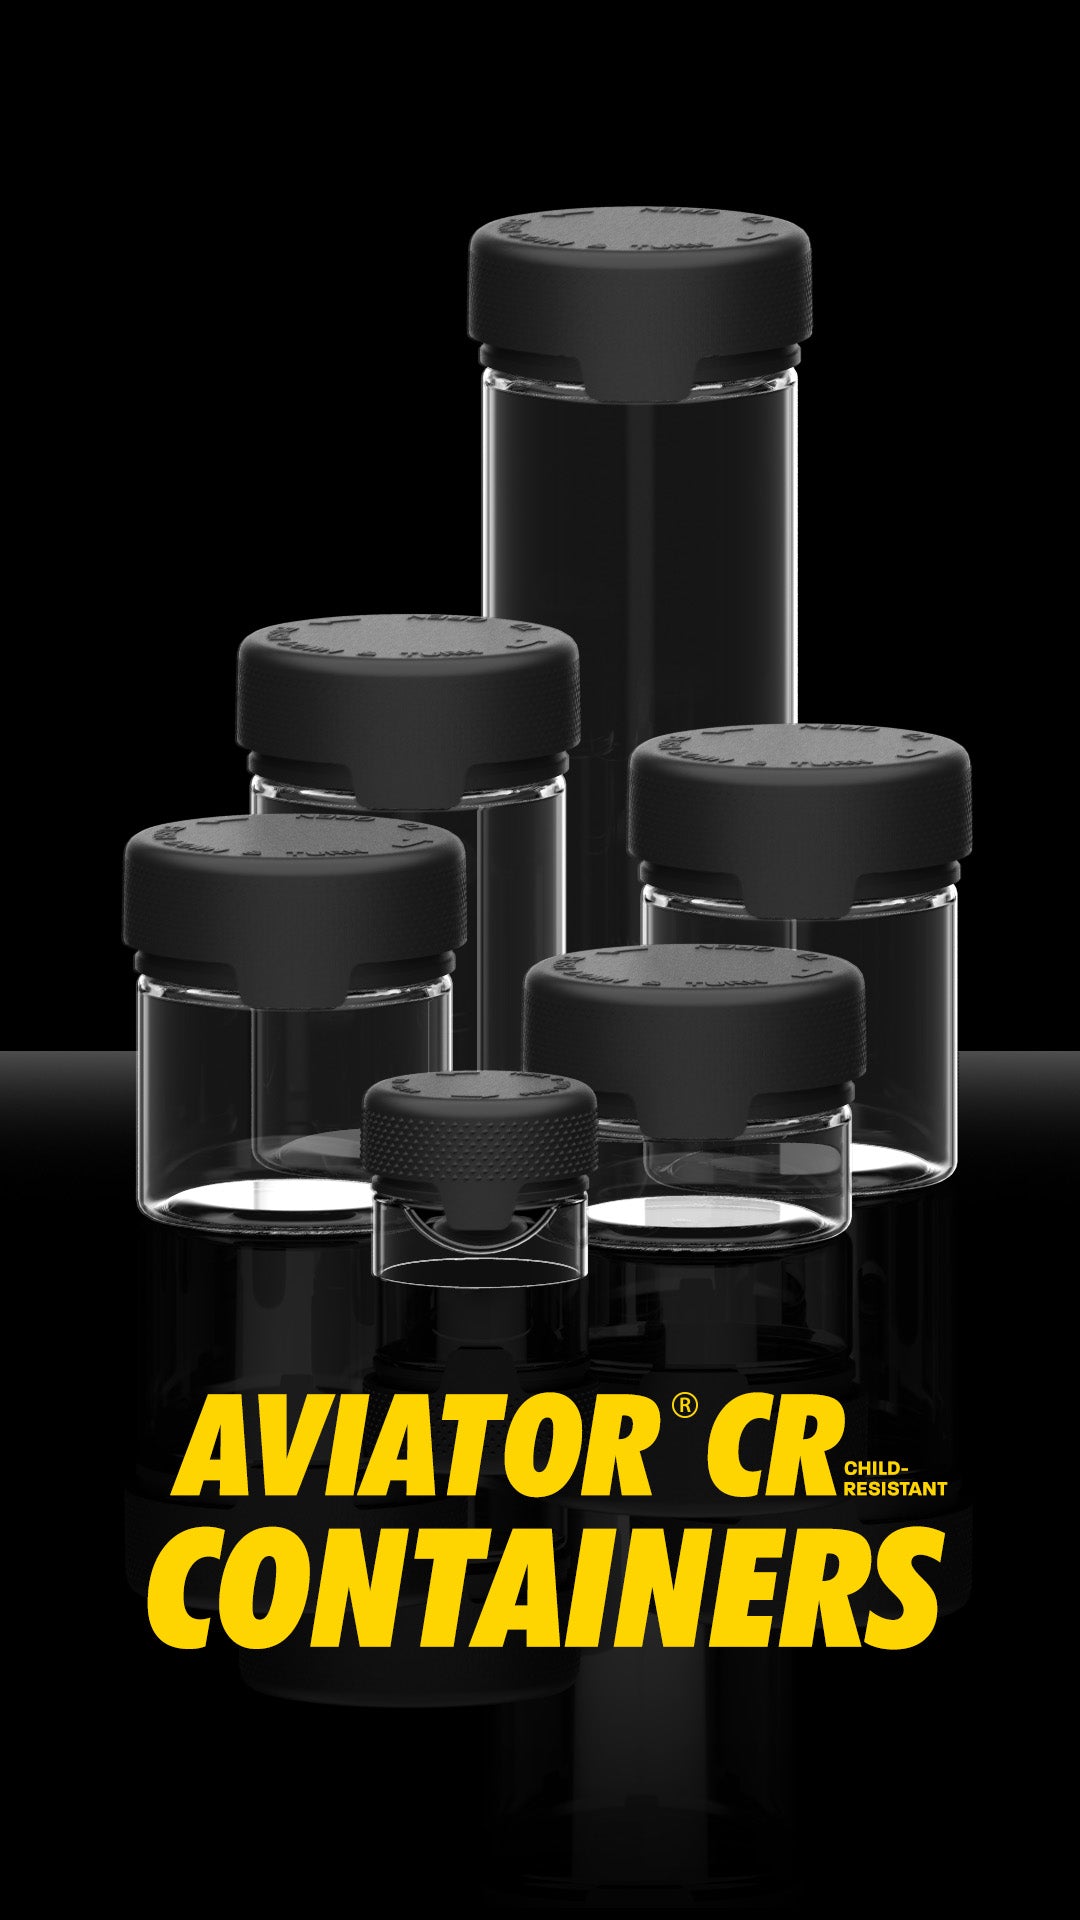 Aviator Containers